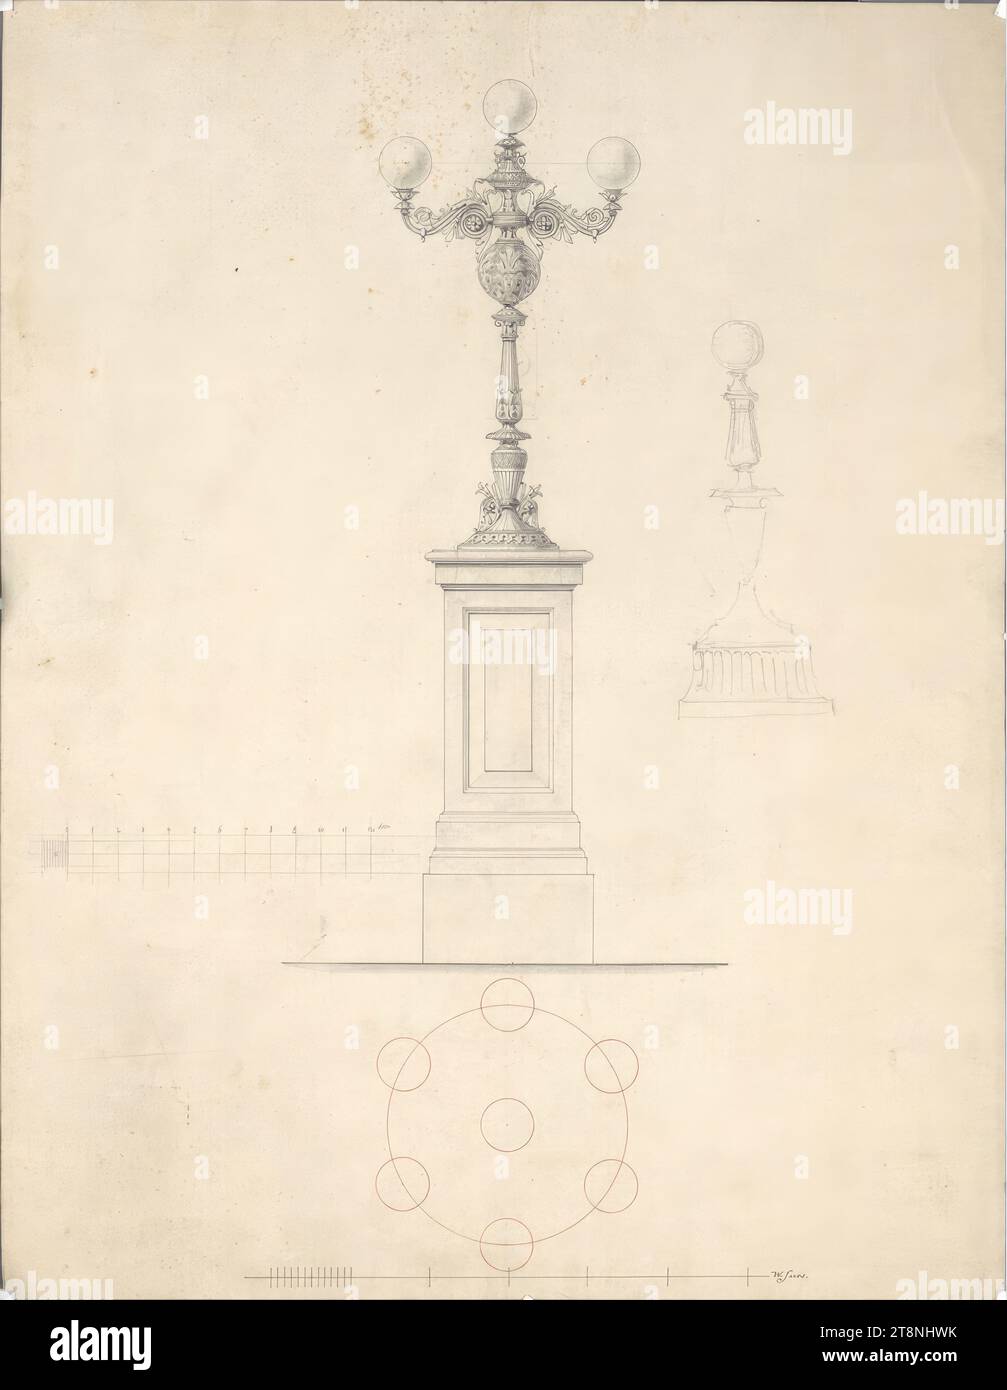 Vienna I, Hofburg, furnishings, candelabra, ground plan, elevation, 2nd half of the 19th century, architectural drawing, graphite; Pen in black, sheet: 43.5 x 33.5 cm Stock Photo